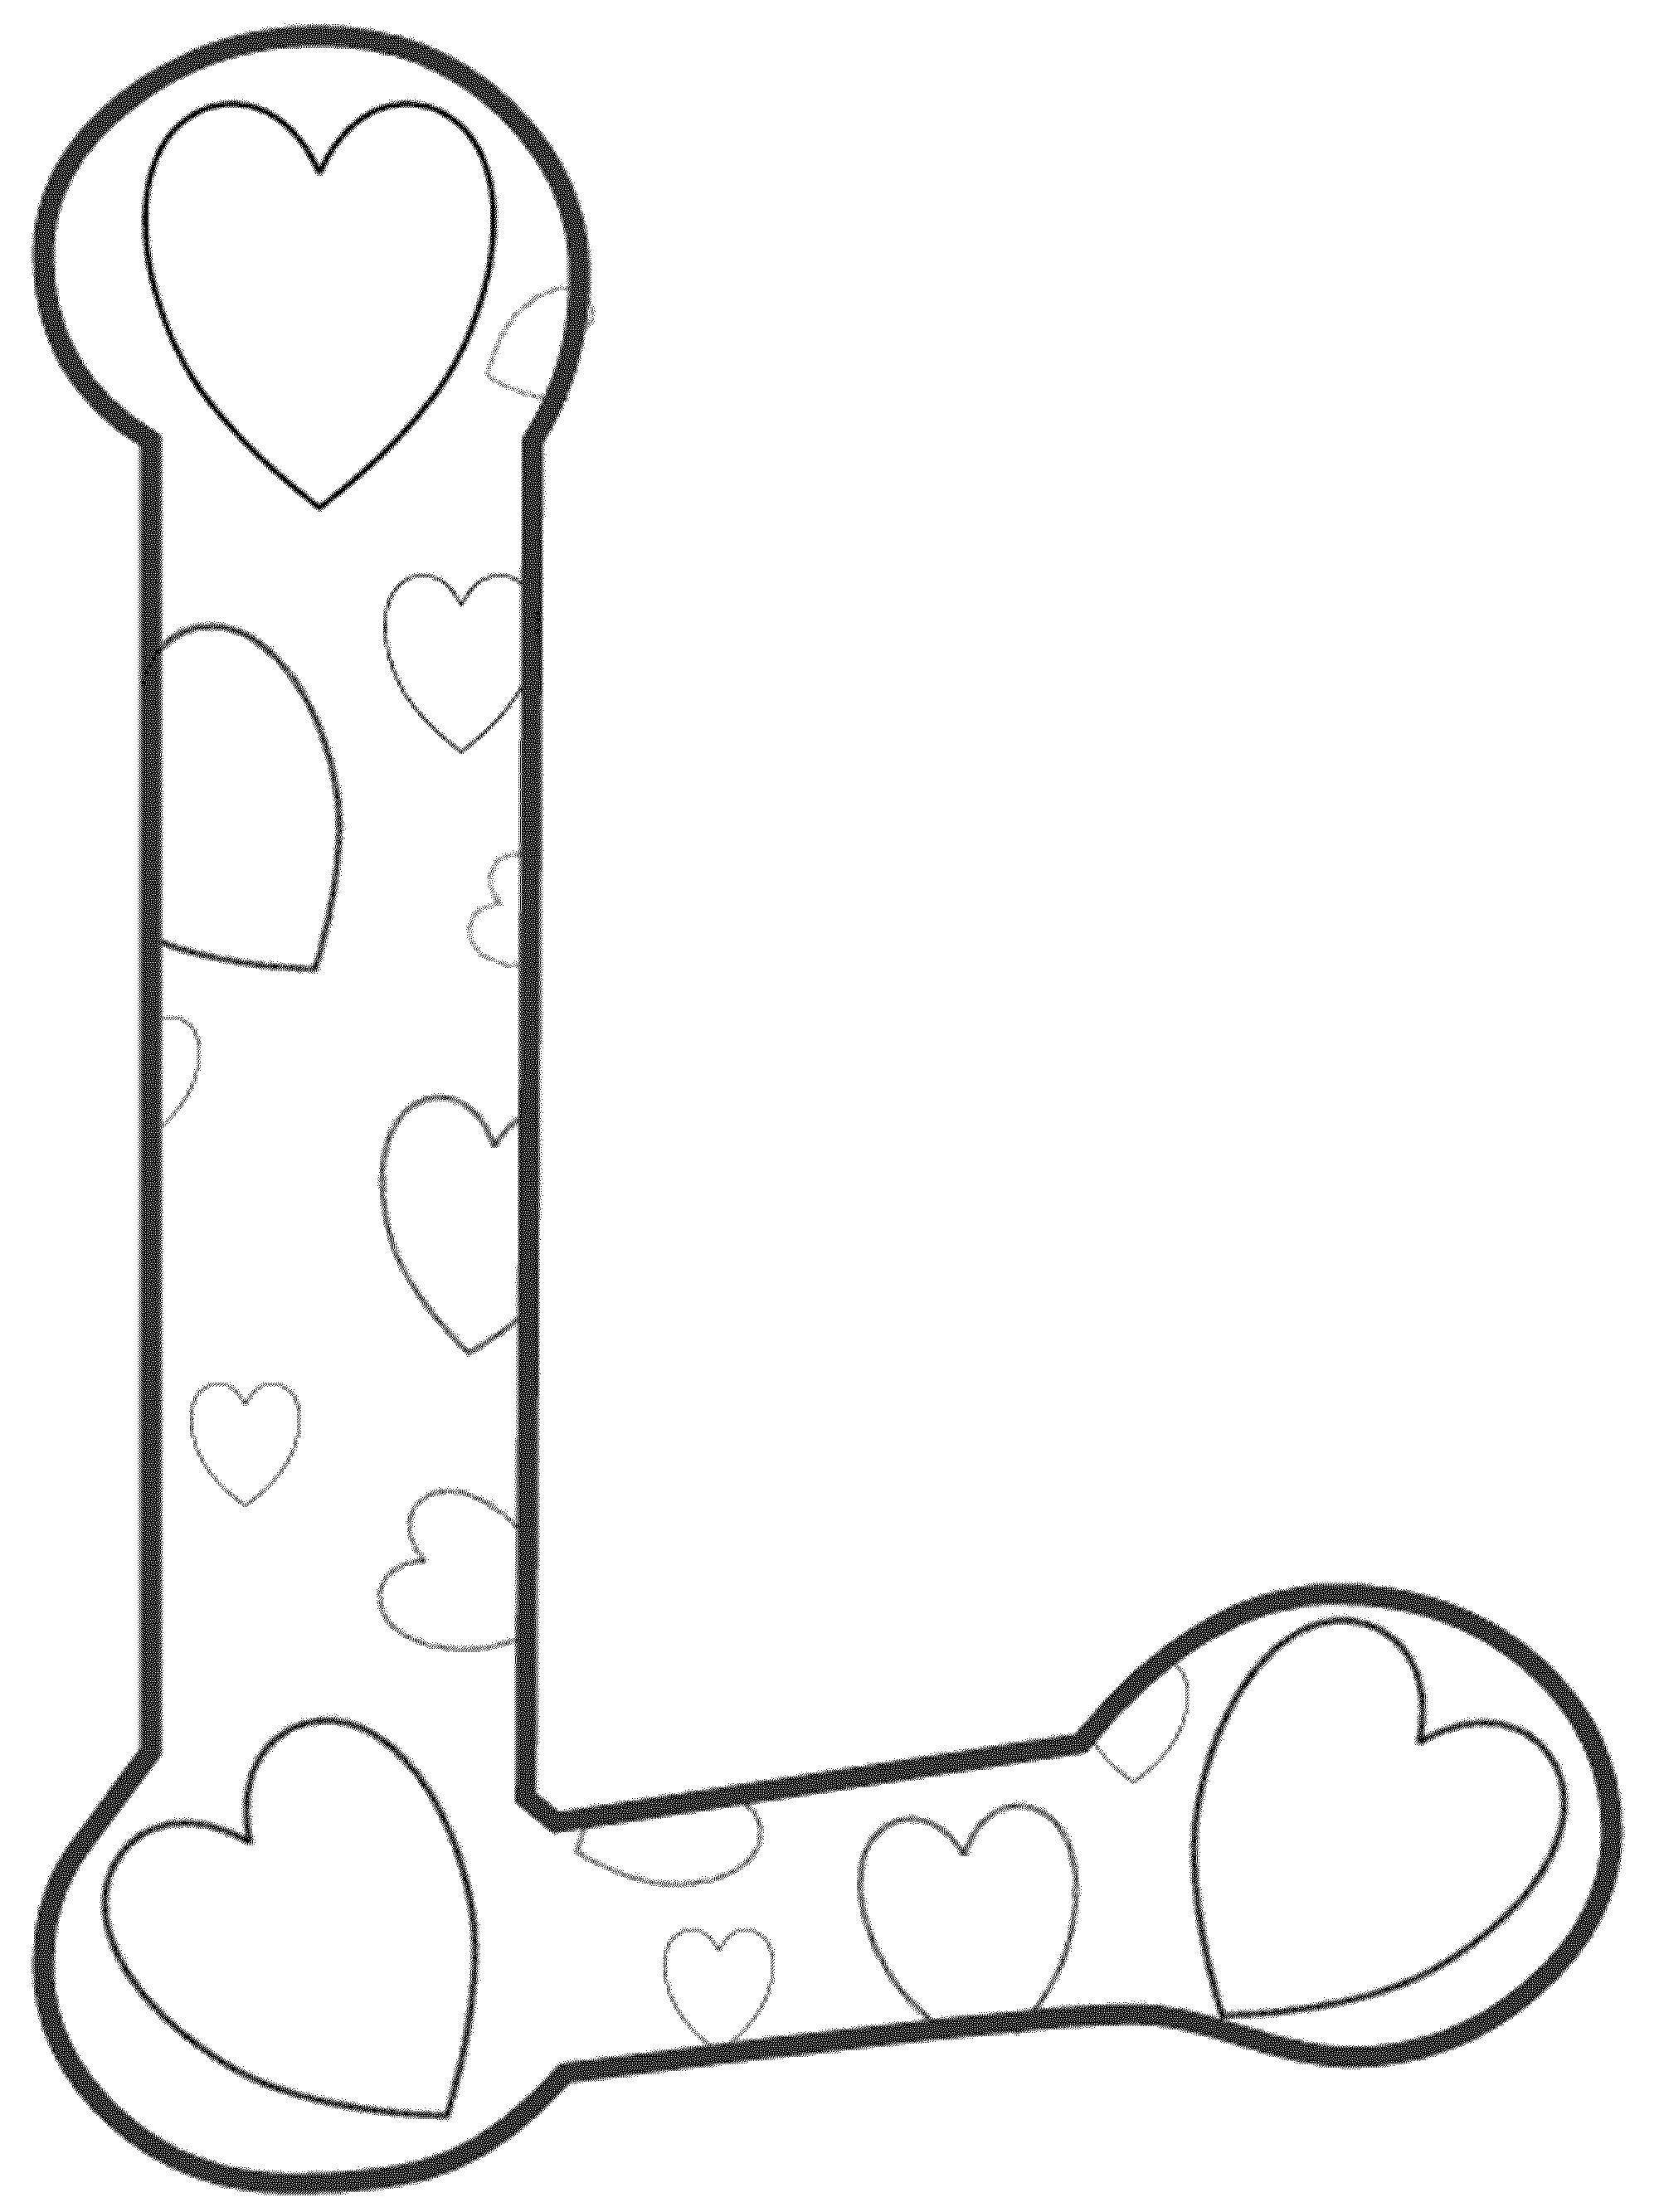 Coloring Letter l. Category I love you. Tags:  letter L, love.